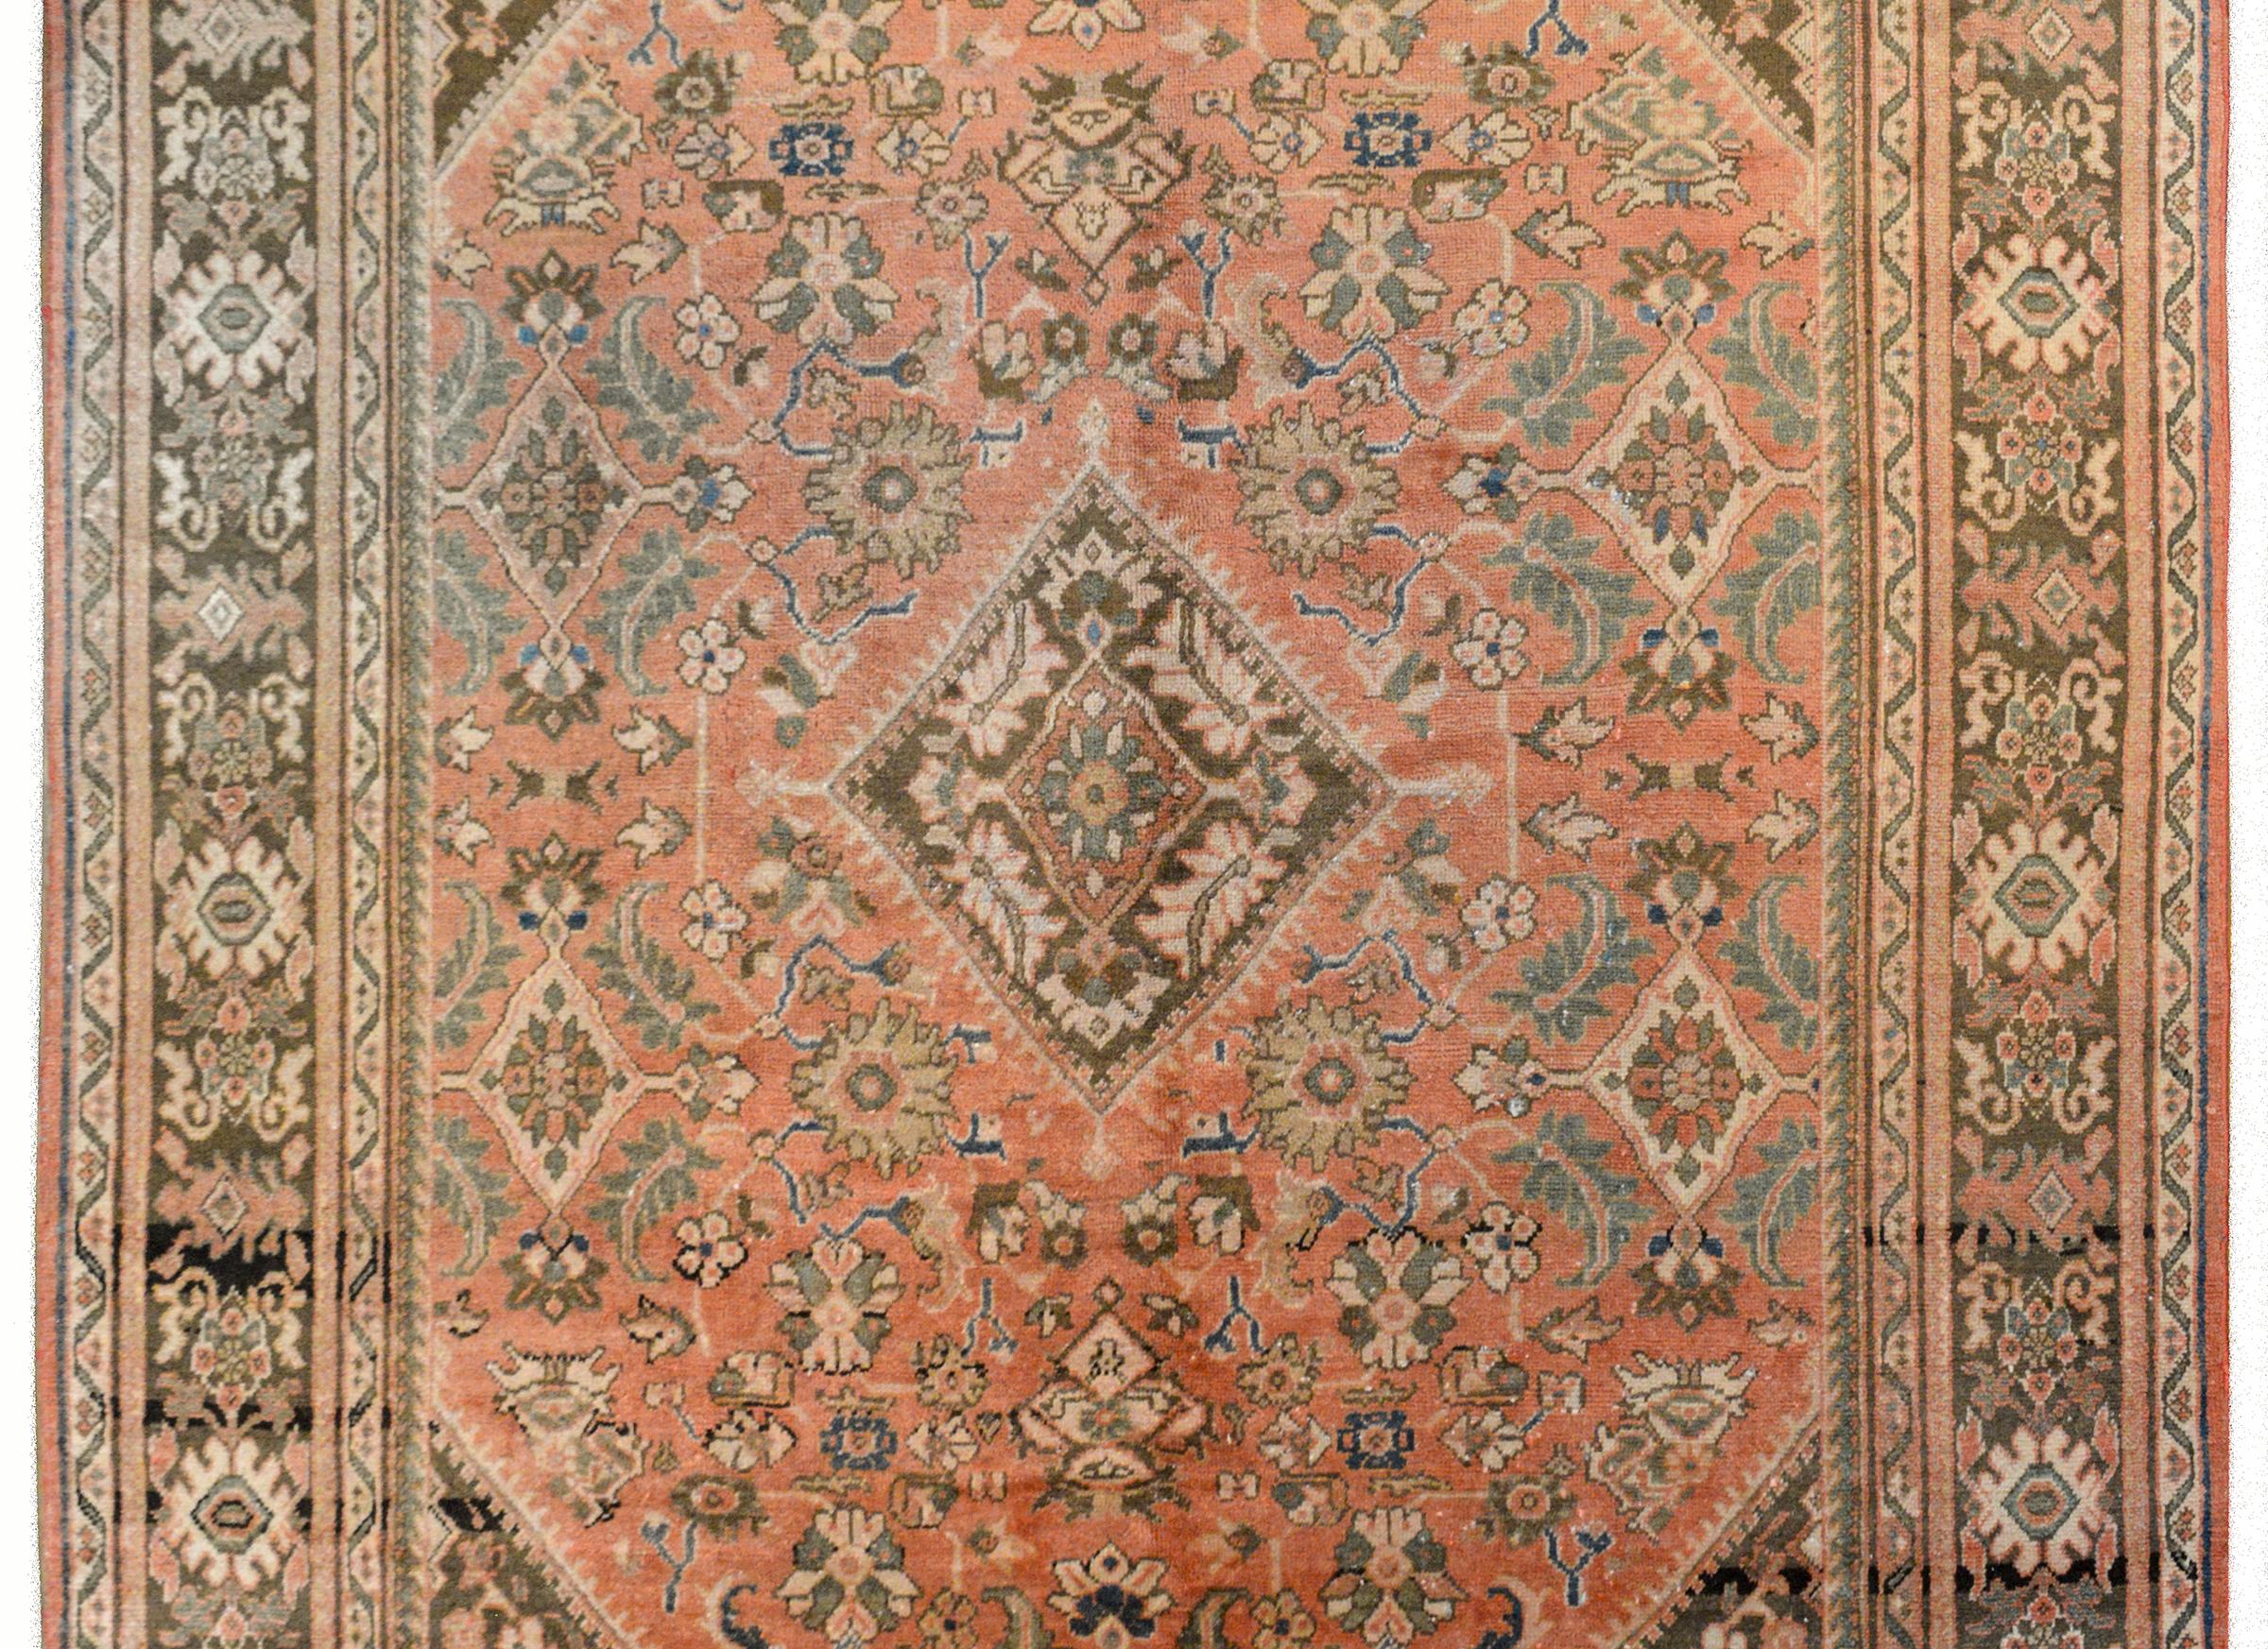 A fantastic 20th-century Mushkabad rug with a bold tribal pattern containing myriad flowers and leaves woven in varying shades of gray and taupe against a muted orange background. The border is strong with large-scale stylized flowers flanked by